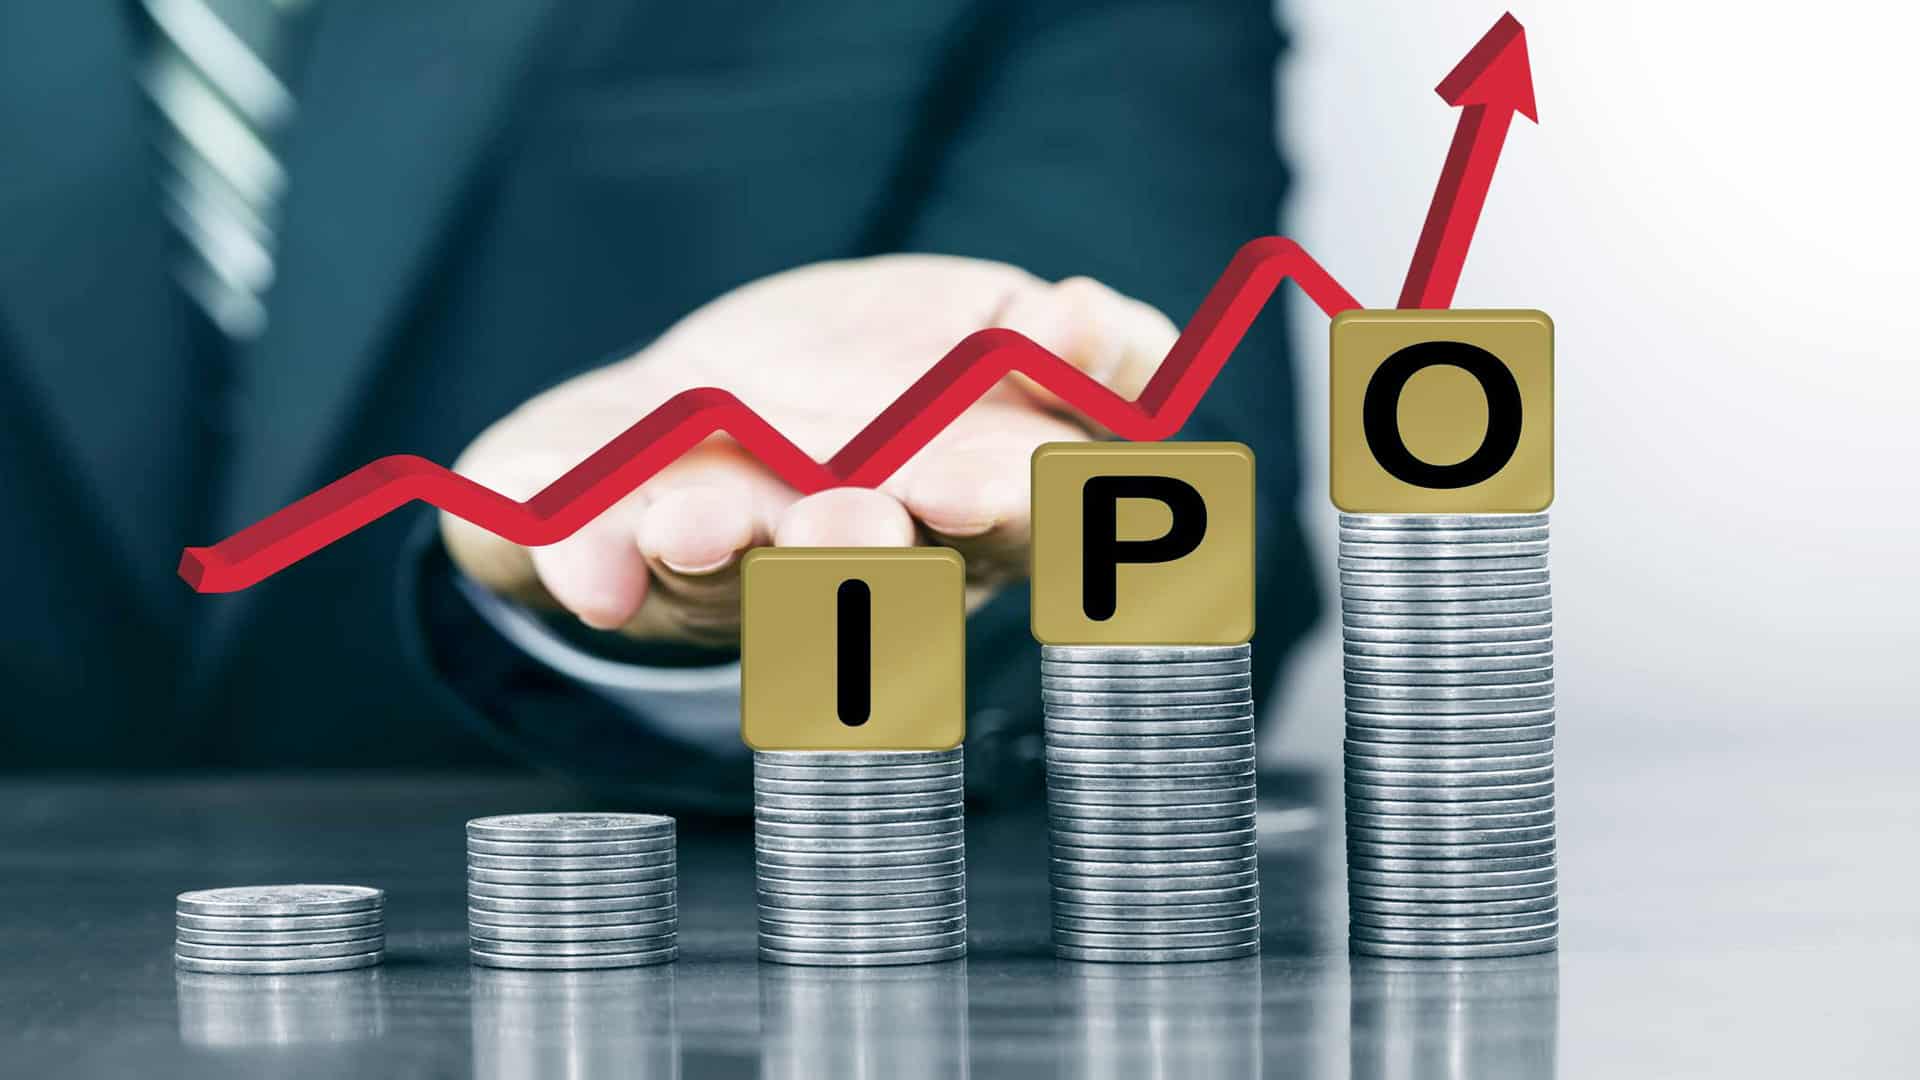 Delhivery sets IPO price band at Rs 462-487 per share